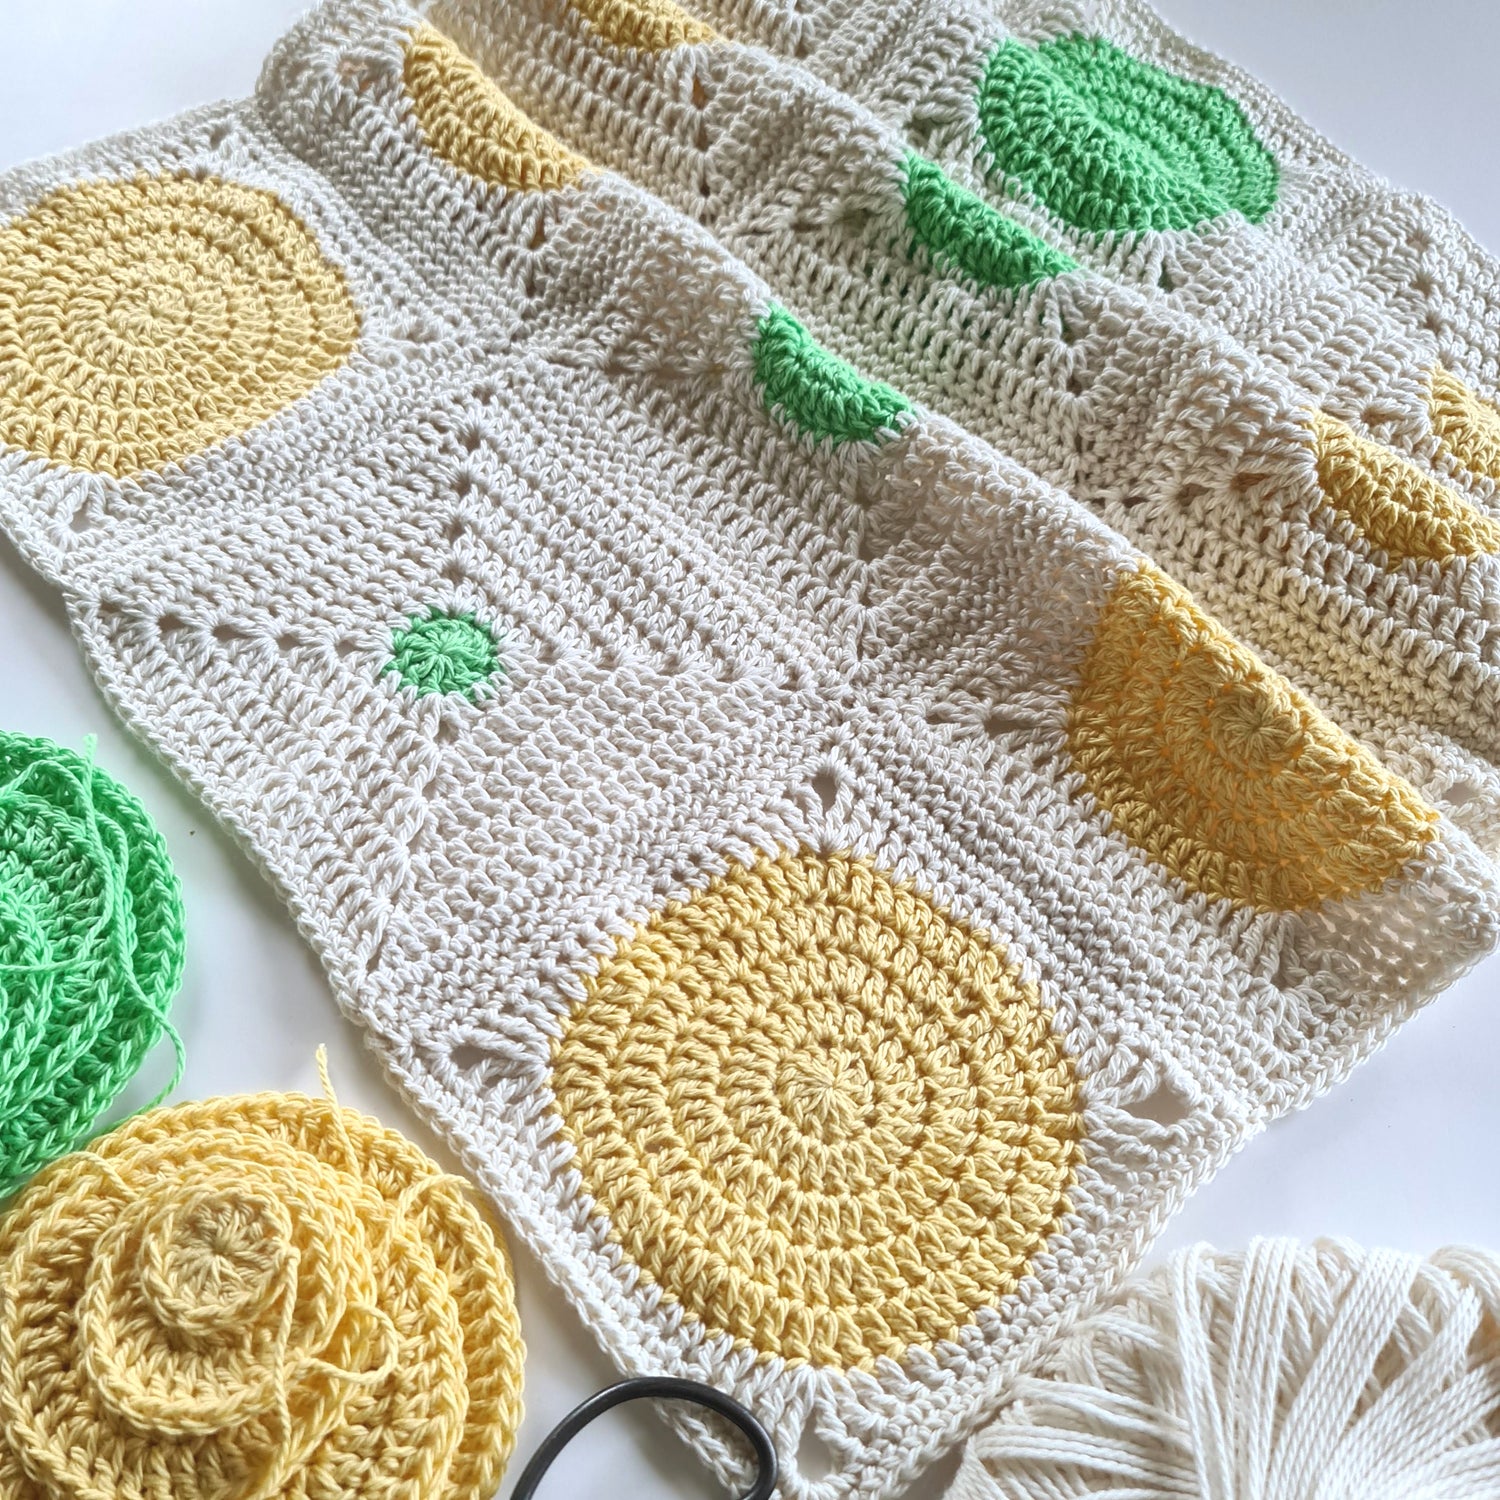 Pale yellow and bright green granny squares stitched in partially finished rows with loose circles waiting to become granny squares.